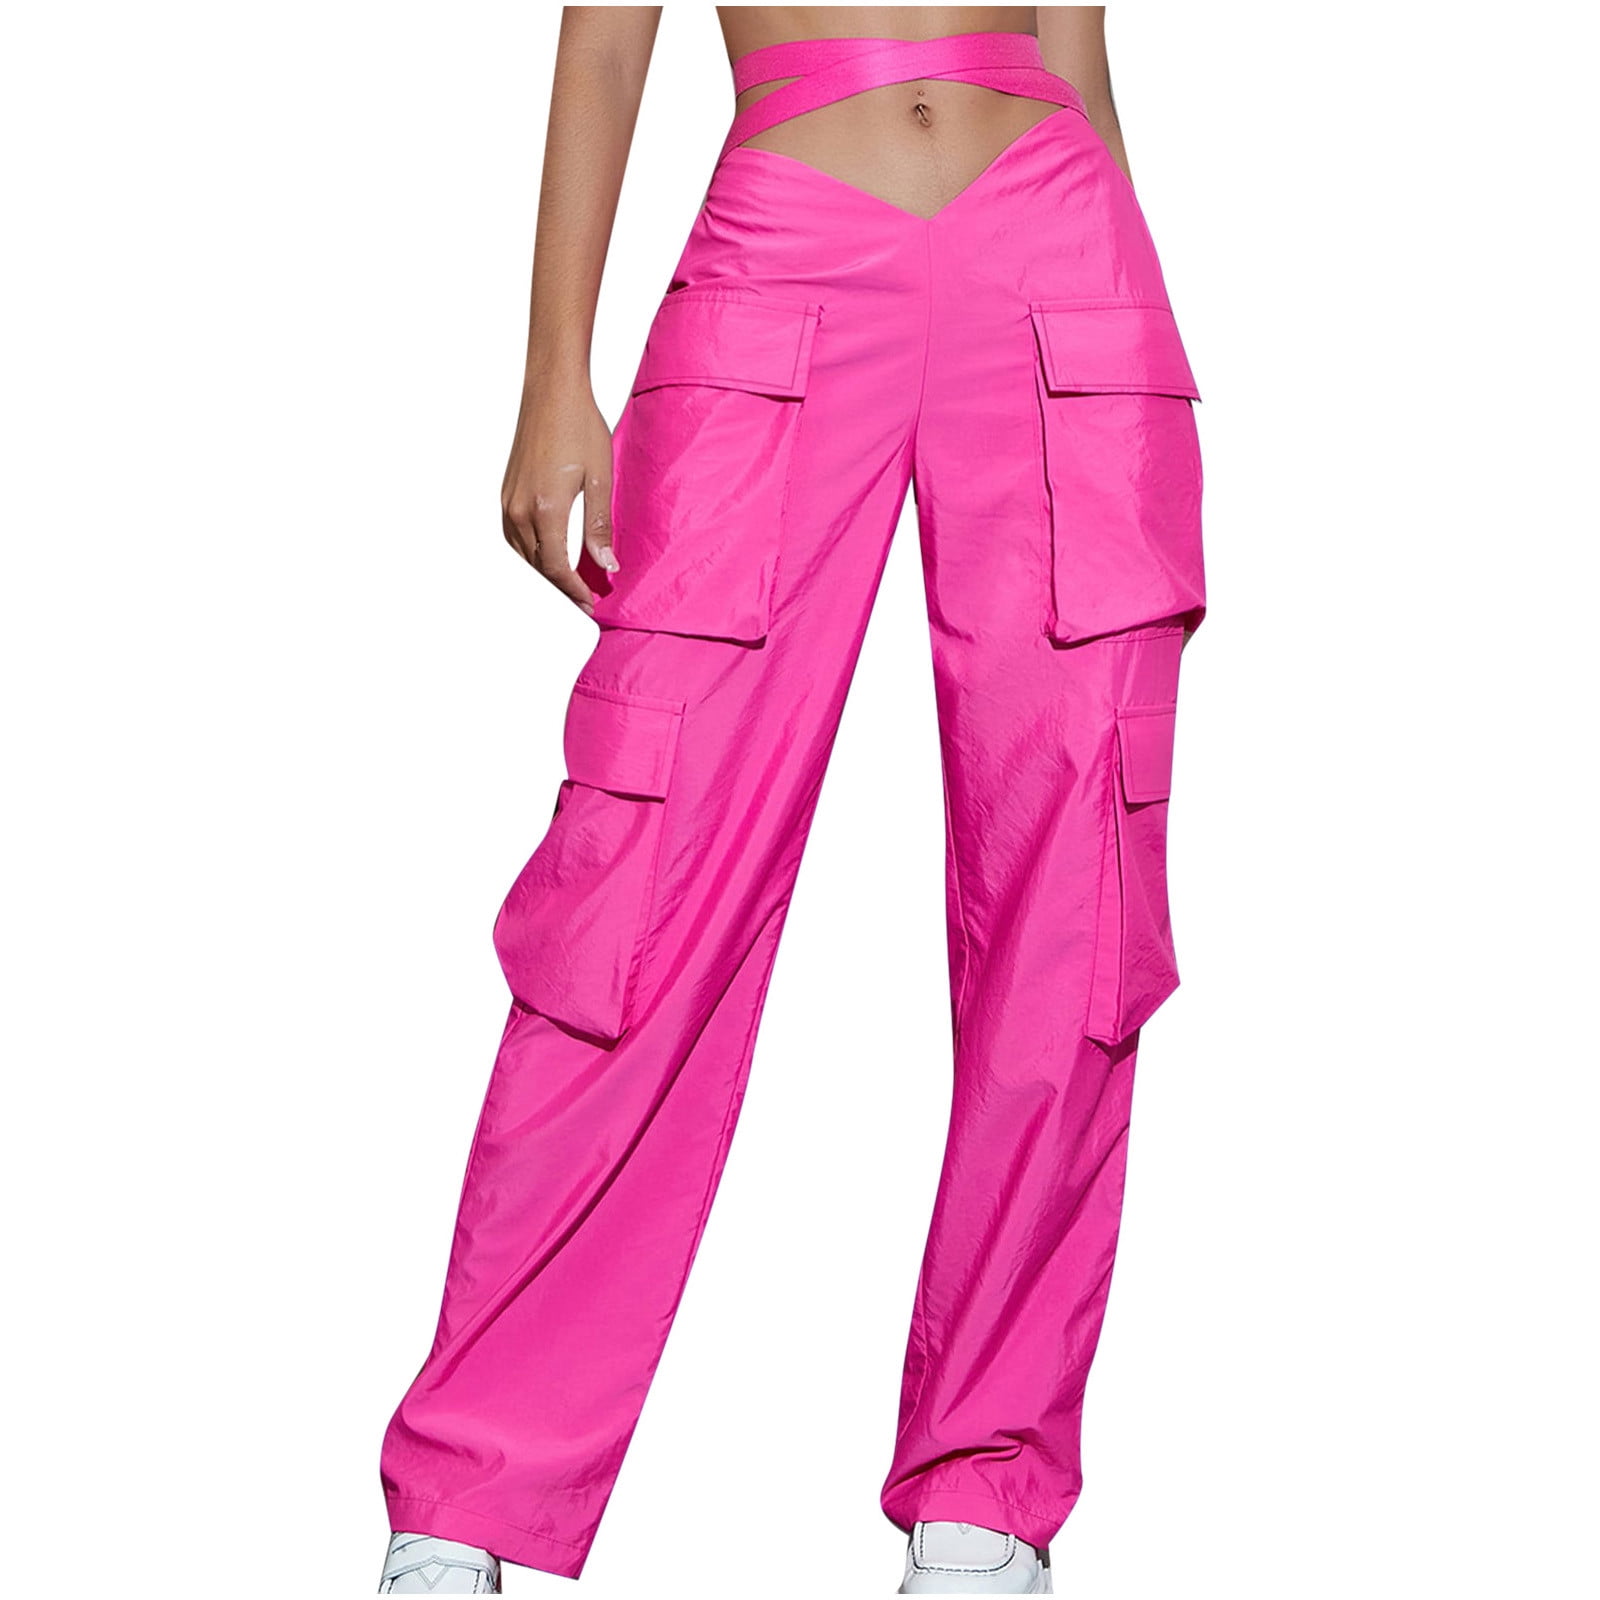 JWZUY Streetwear Cargo Pants for Women High Elastic Waisted Criss Cross V  Waist with Belt Straight Pants with Pockets Hot Pink M 